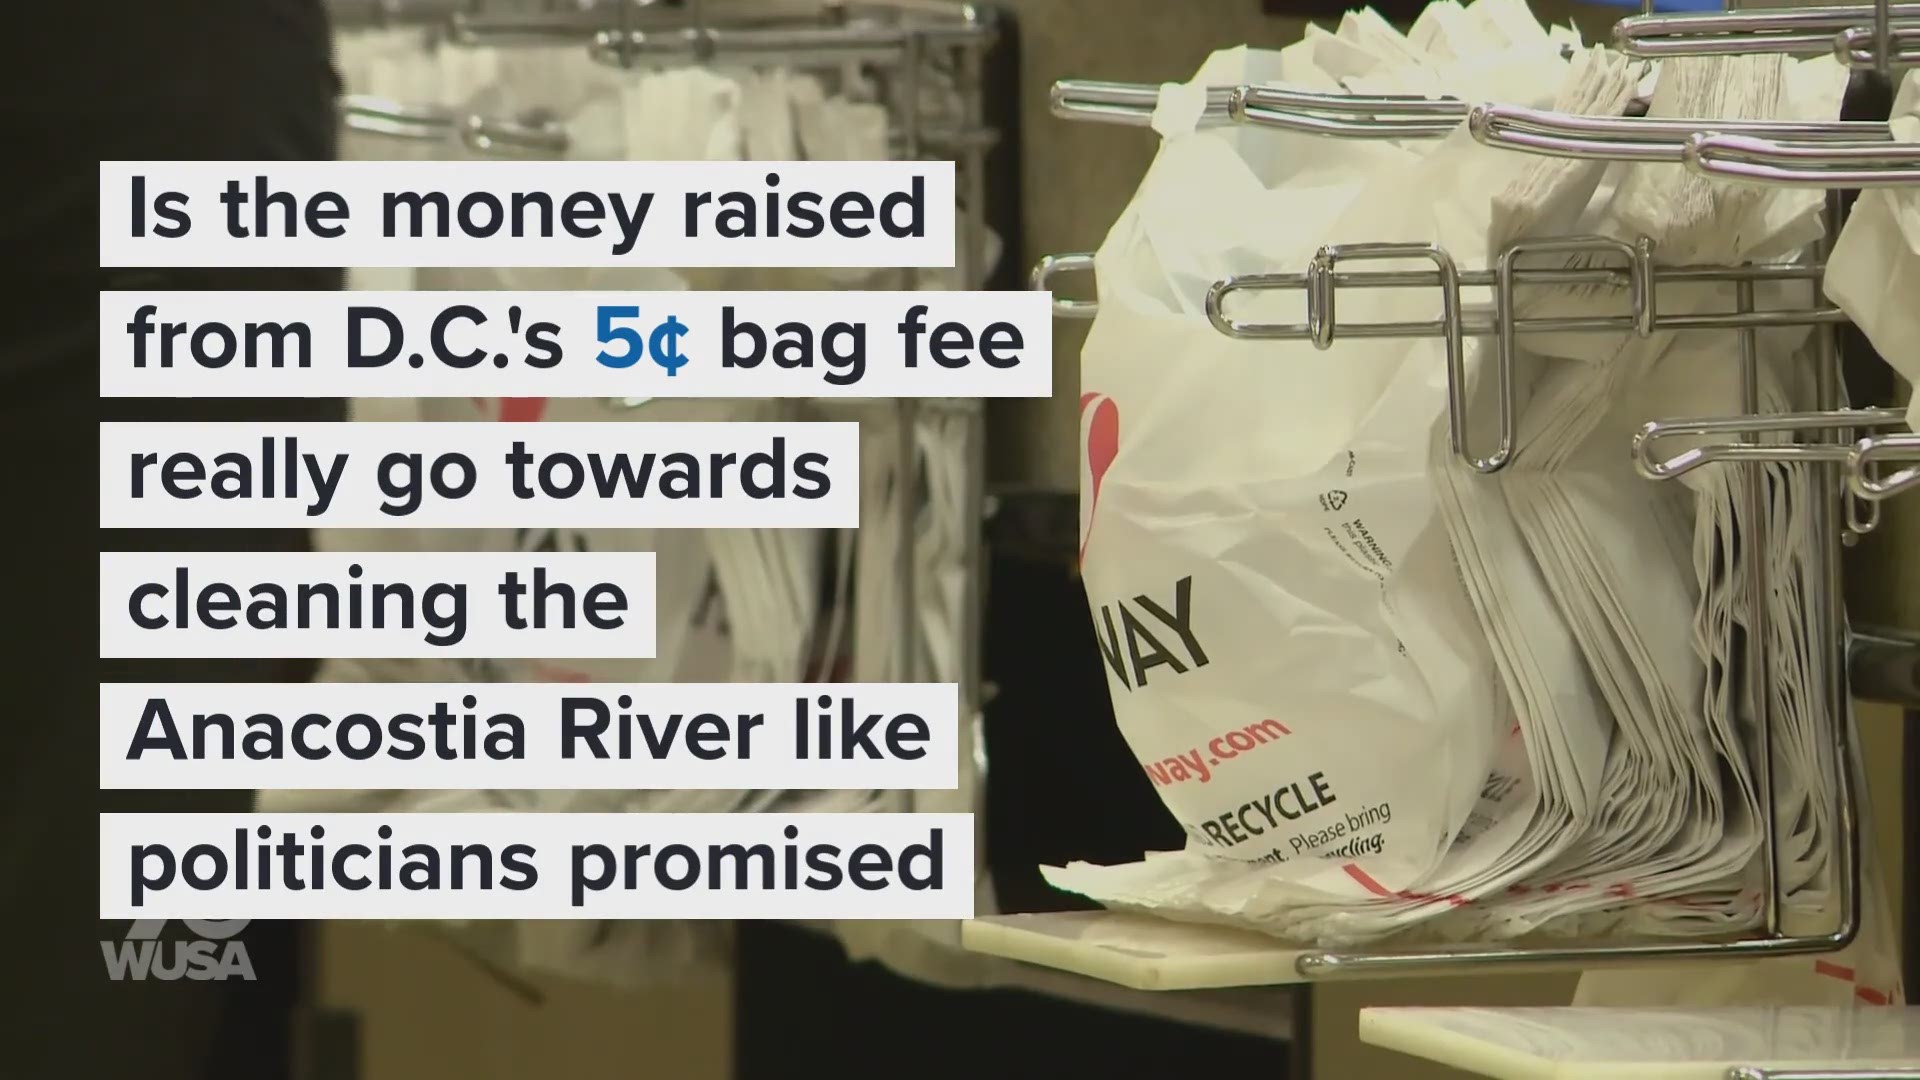 A viewer asked the Verify team to follow the money. Do the funds raised really go towards cleaning the Anacostia River like politicians promised?